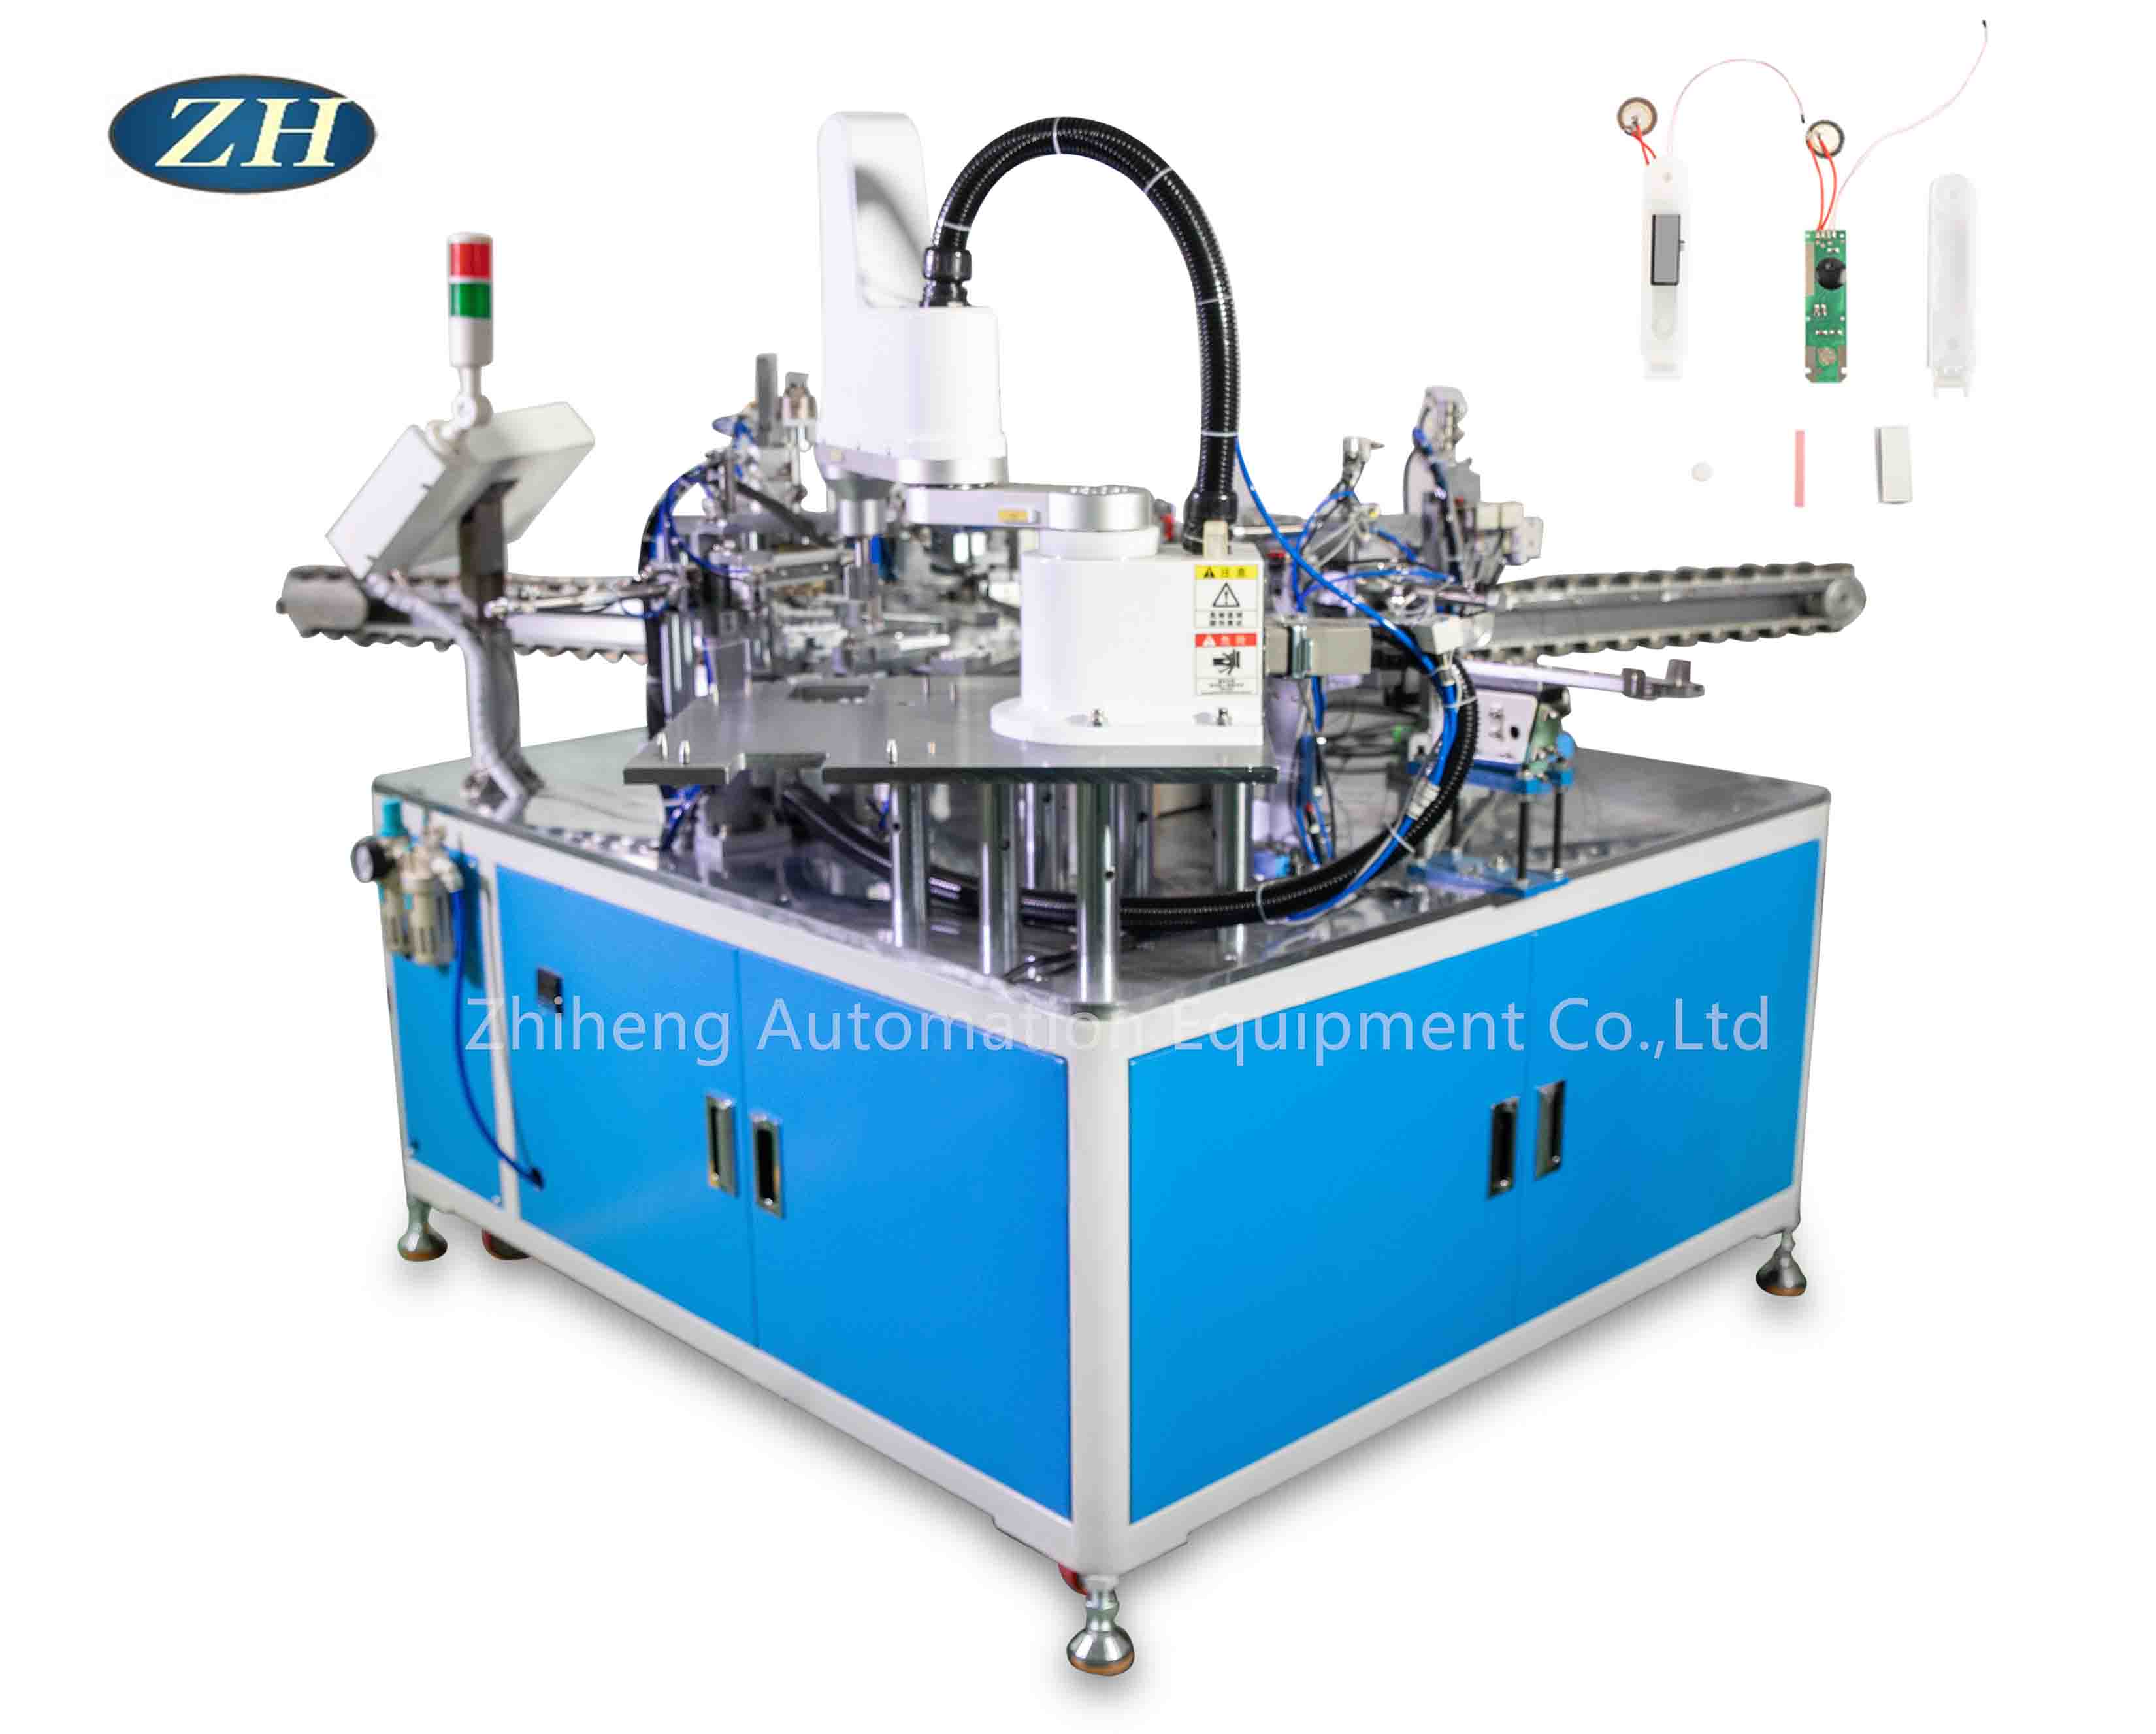 Automated Assembly Machine for Digital Thermometer